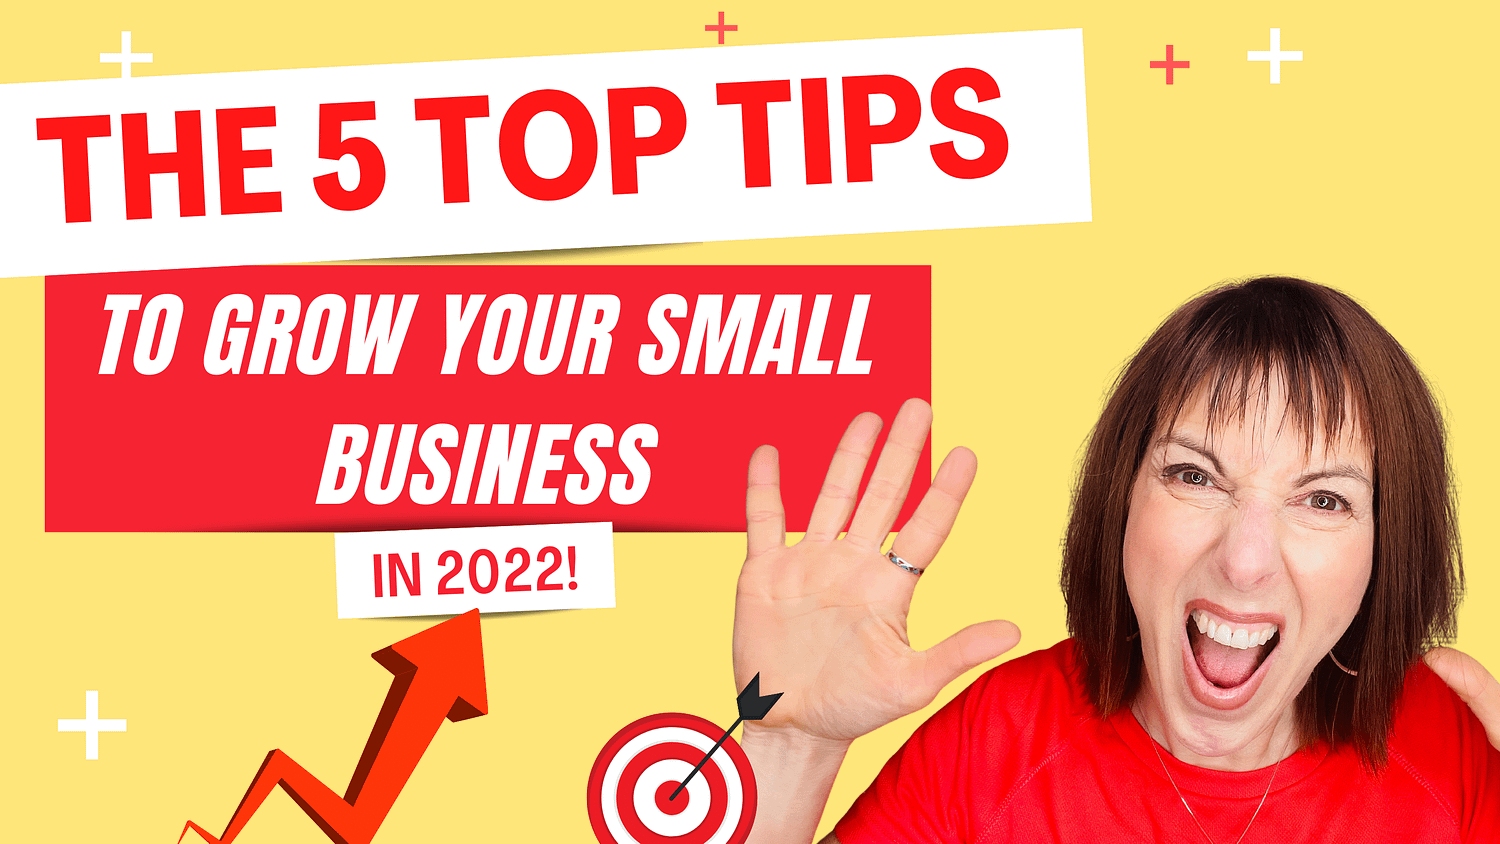 The 5 Top Tips To Grow Your Small Business In 2022